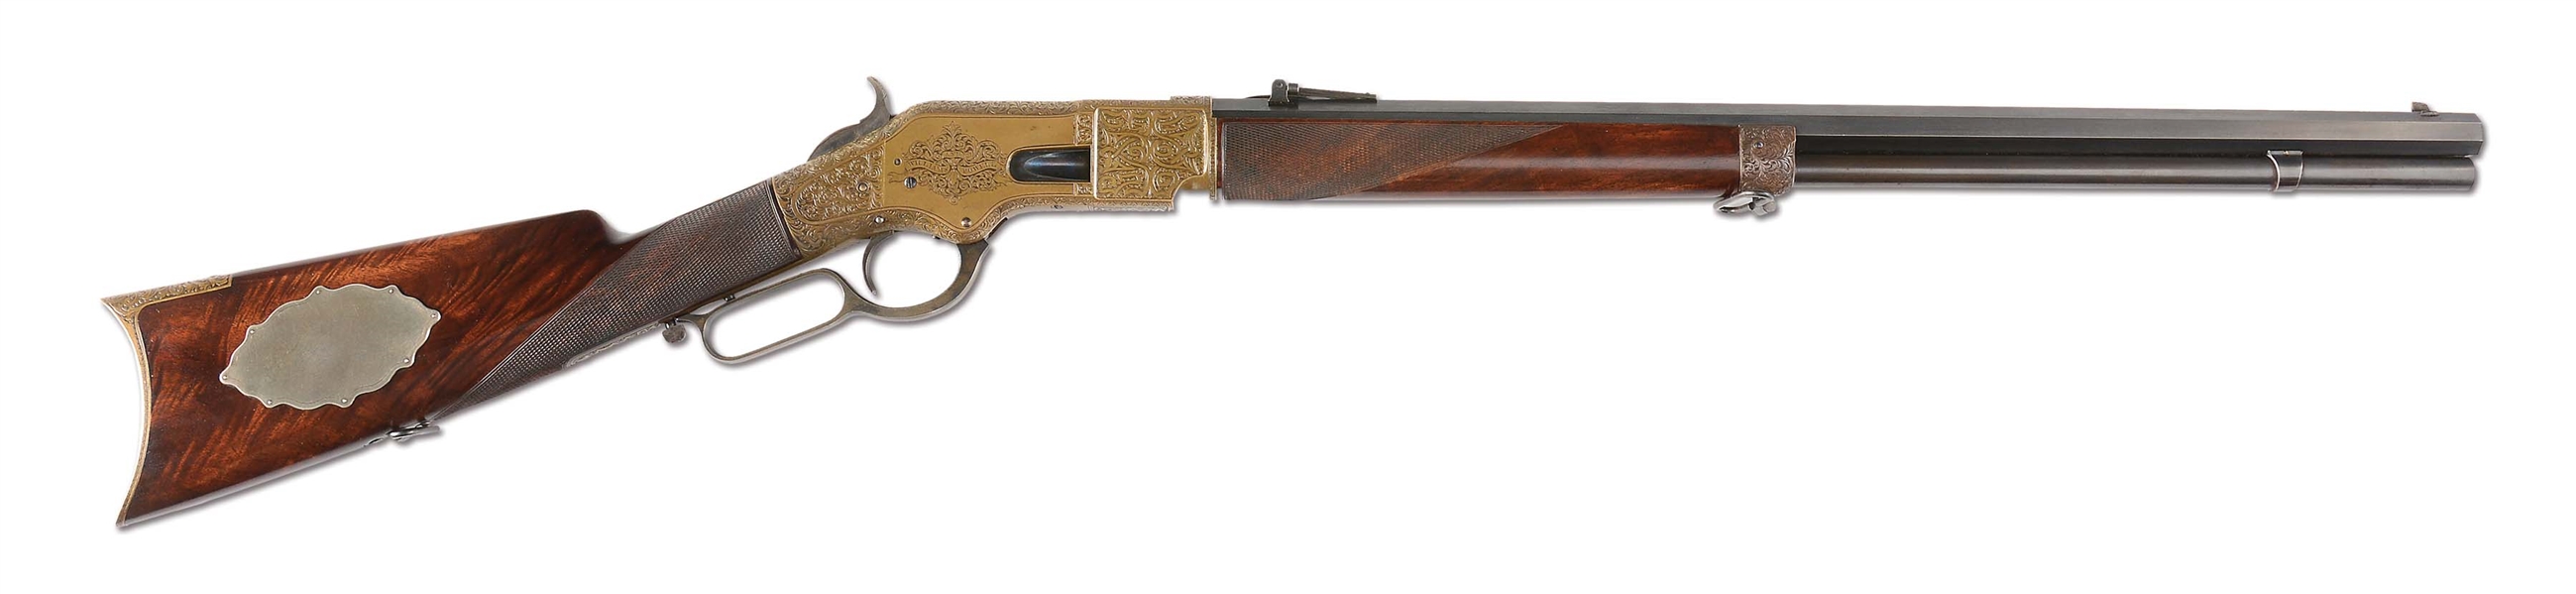 (A) VERY FINE WINCHESTER 1866 RIFLE WITH PERIOD BEST QUALITY ENGLISH STYLE ENGRAVING AND DELUXE FIGURED WALNUT STOCK. 